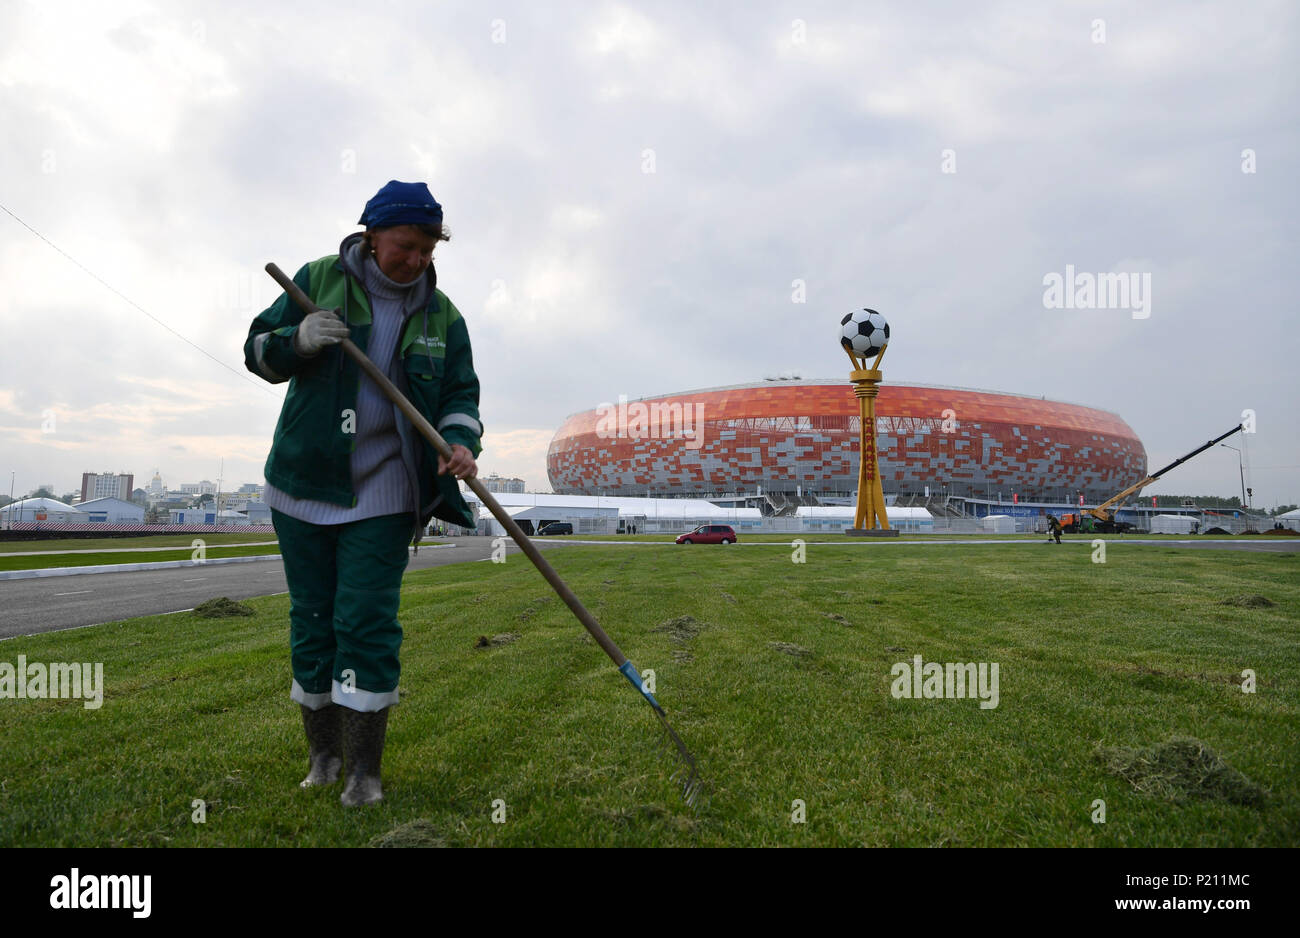 Saransk. 13th June, 2018. A staff member trims a lawn in front of the Mordovia Arena, which will host four group phase matches during the 2018 FIFA World Cup, in Saransk, Russia. Credit: Lui Siu Wai/Xinhua/Alamy Live News Stock Photo